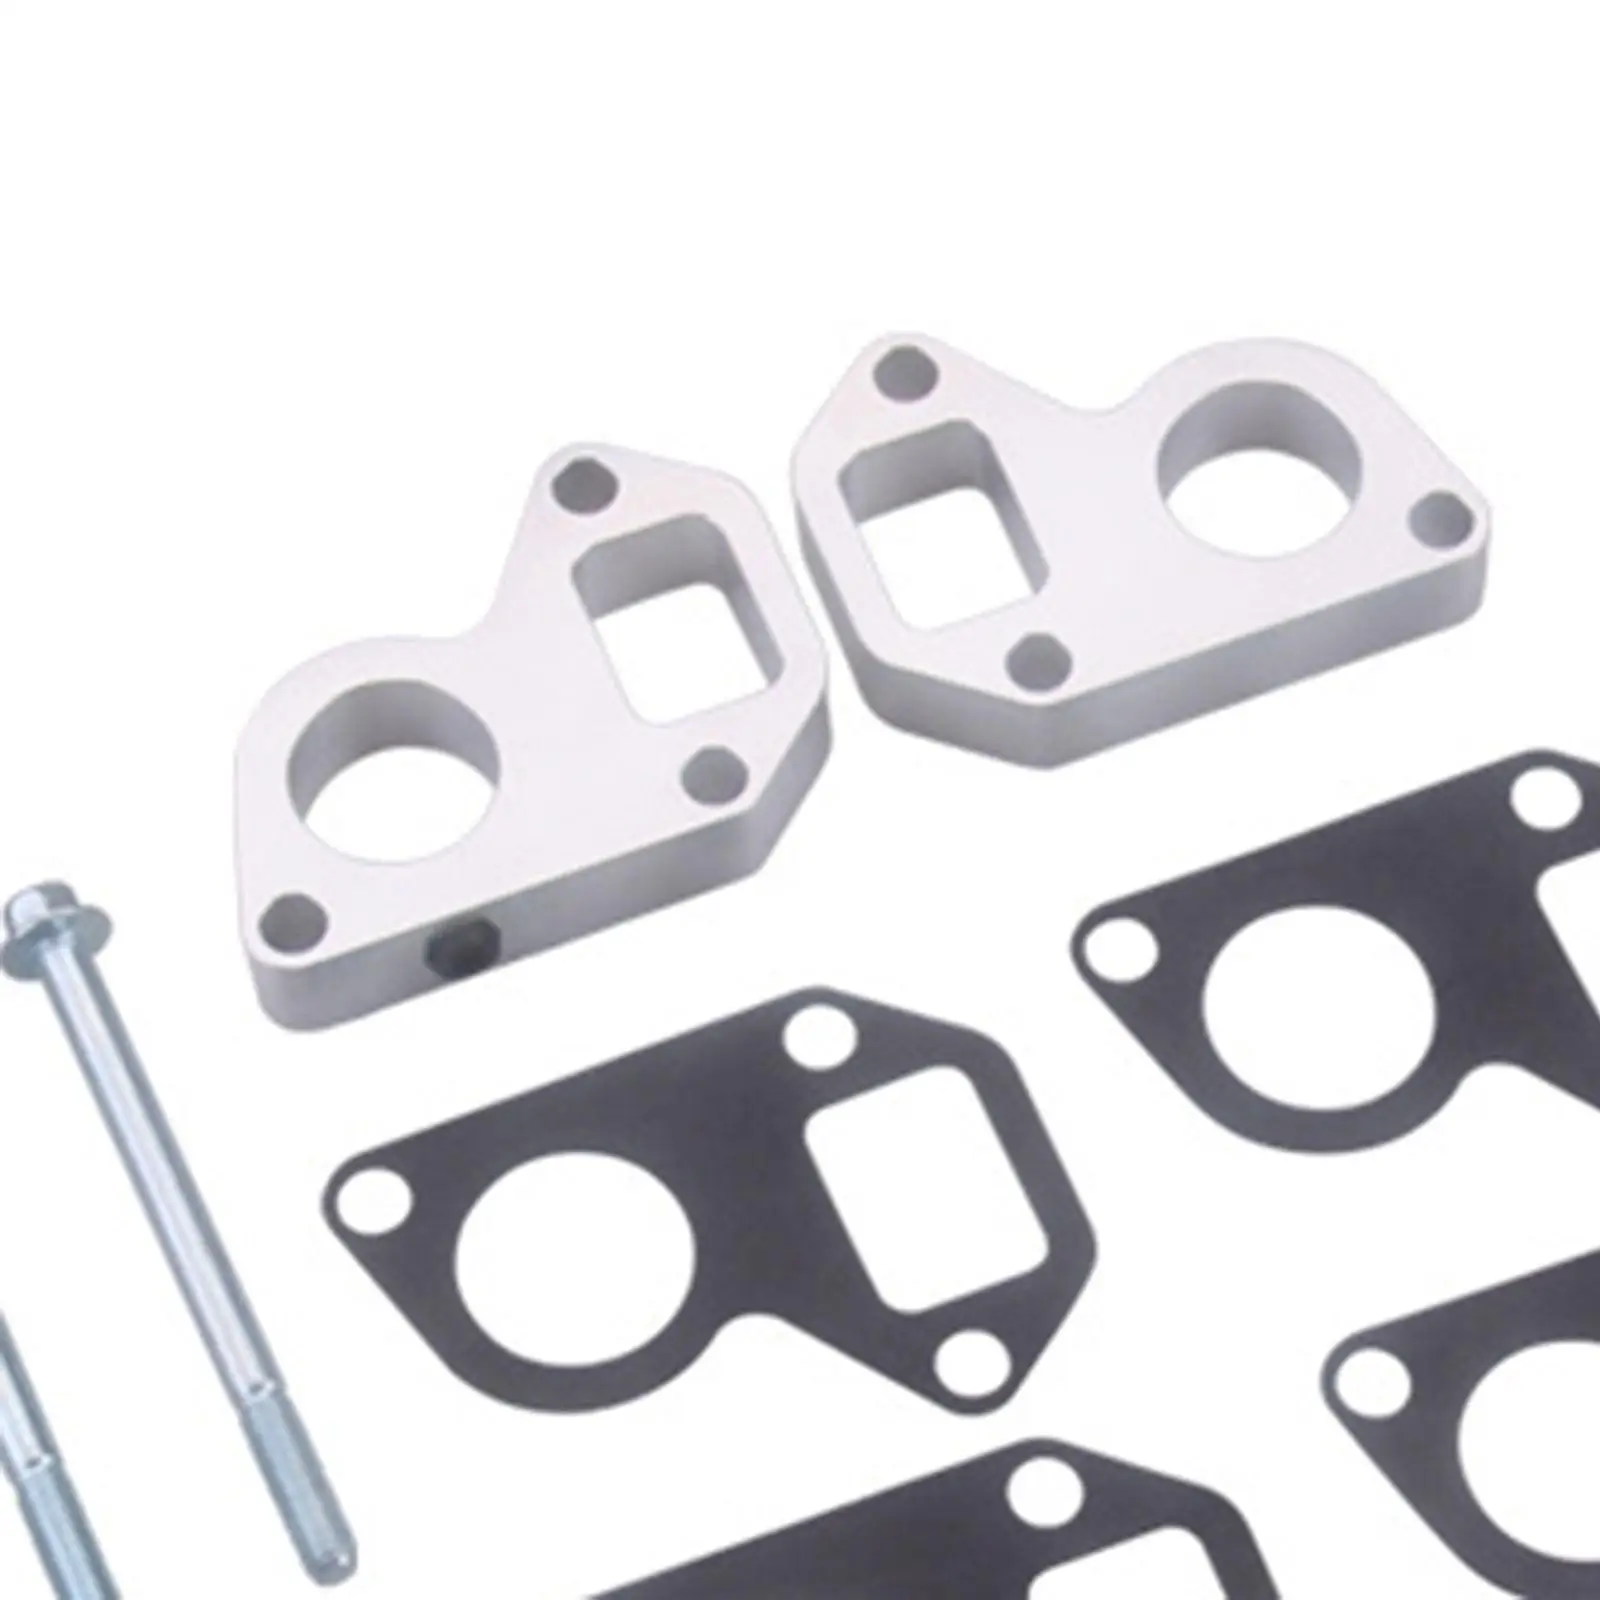 Water Pump Spacer Truck Adapter Swap Set for LS1 to Truck for Spare Parts Truck Accessories